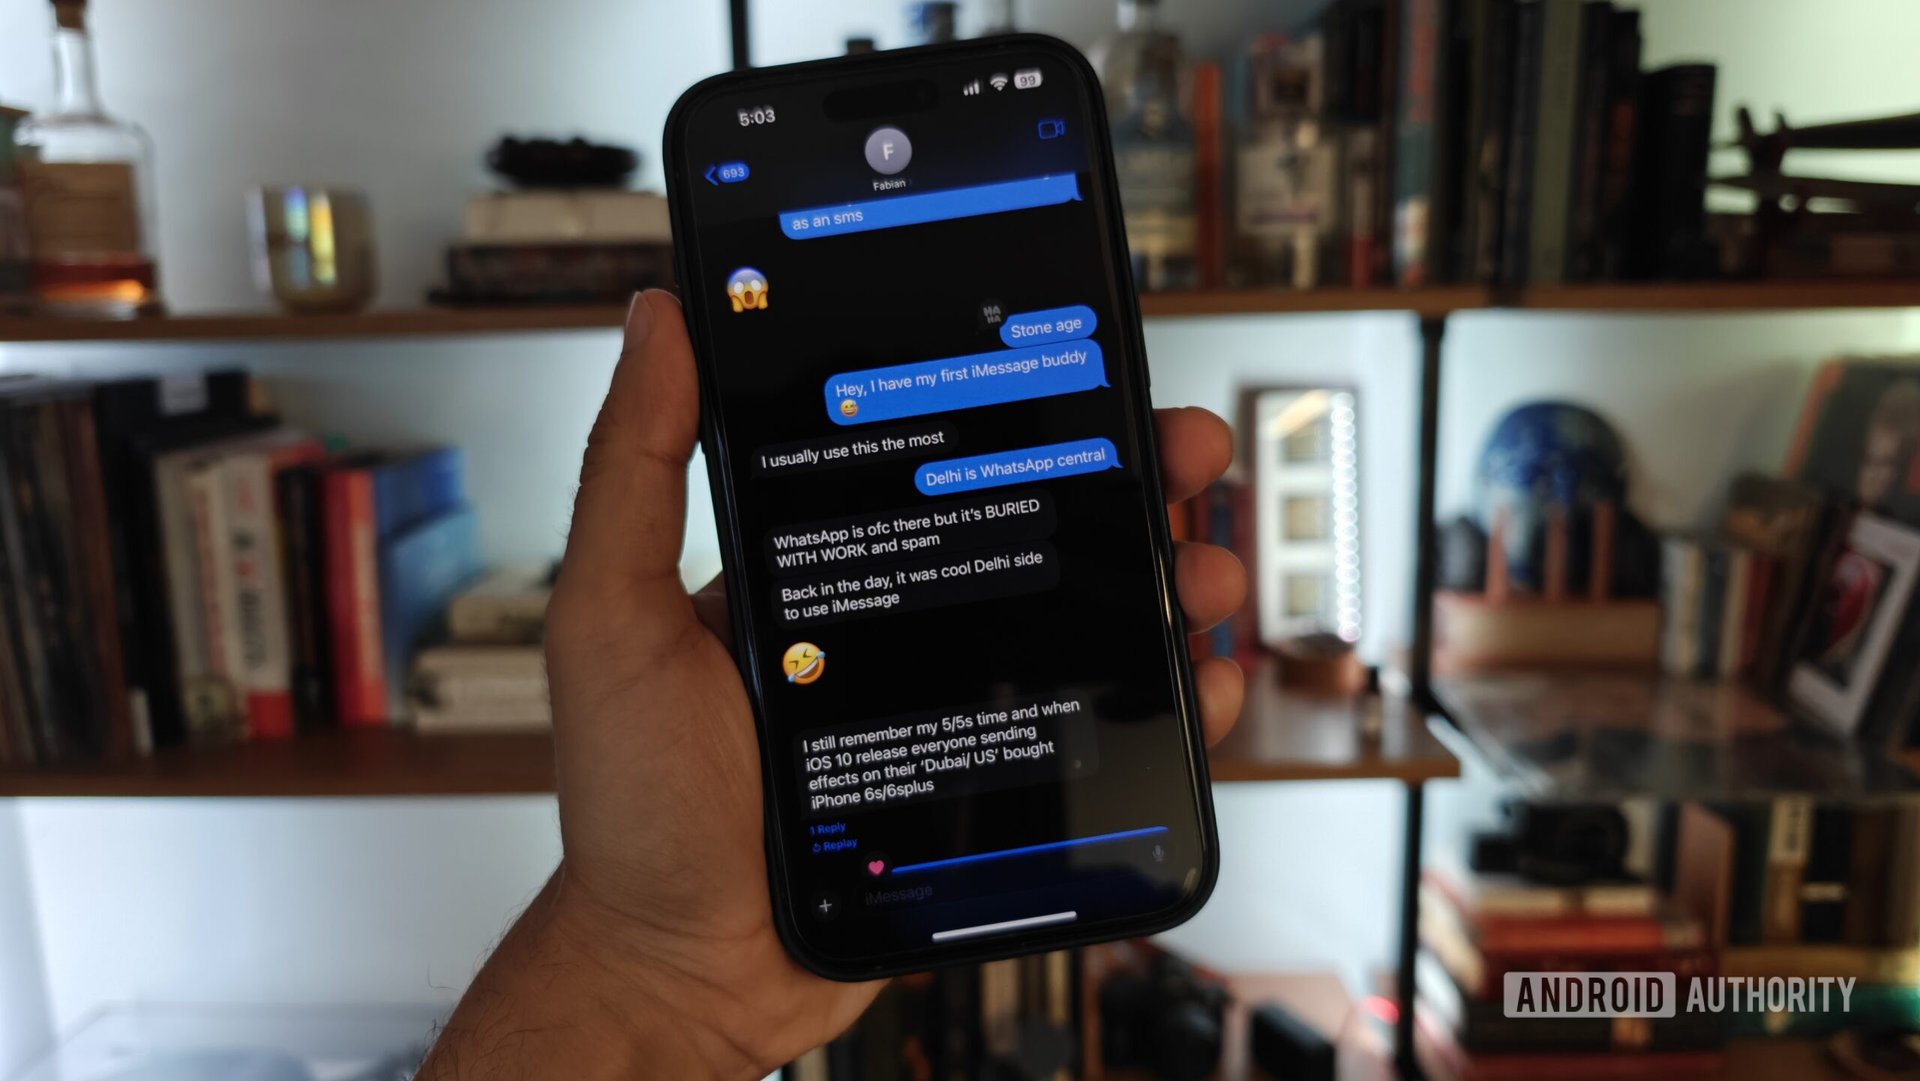 Android not receiving texts from iPhone? Here’s how you can try to fix it